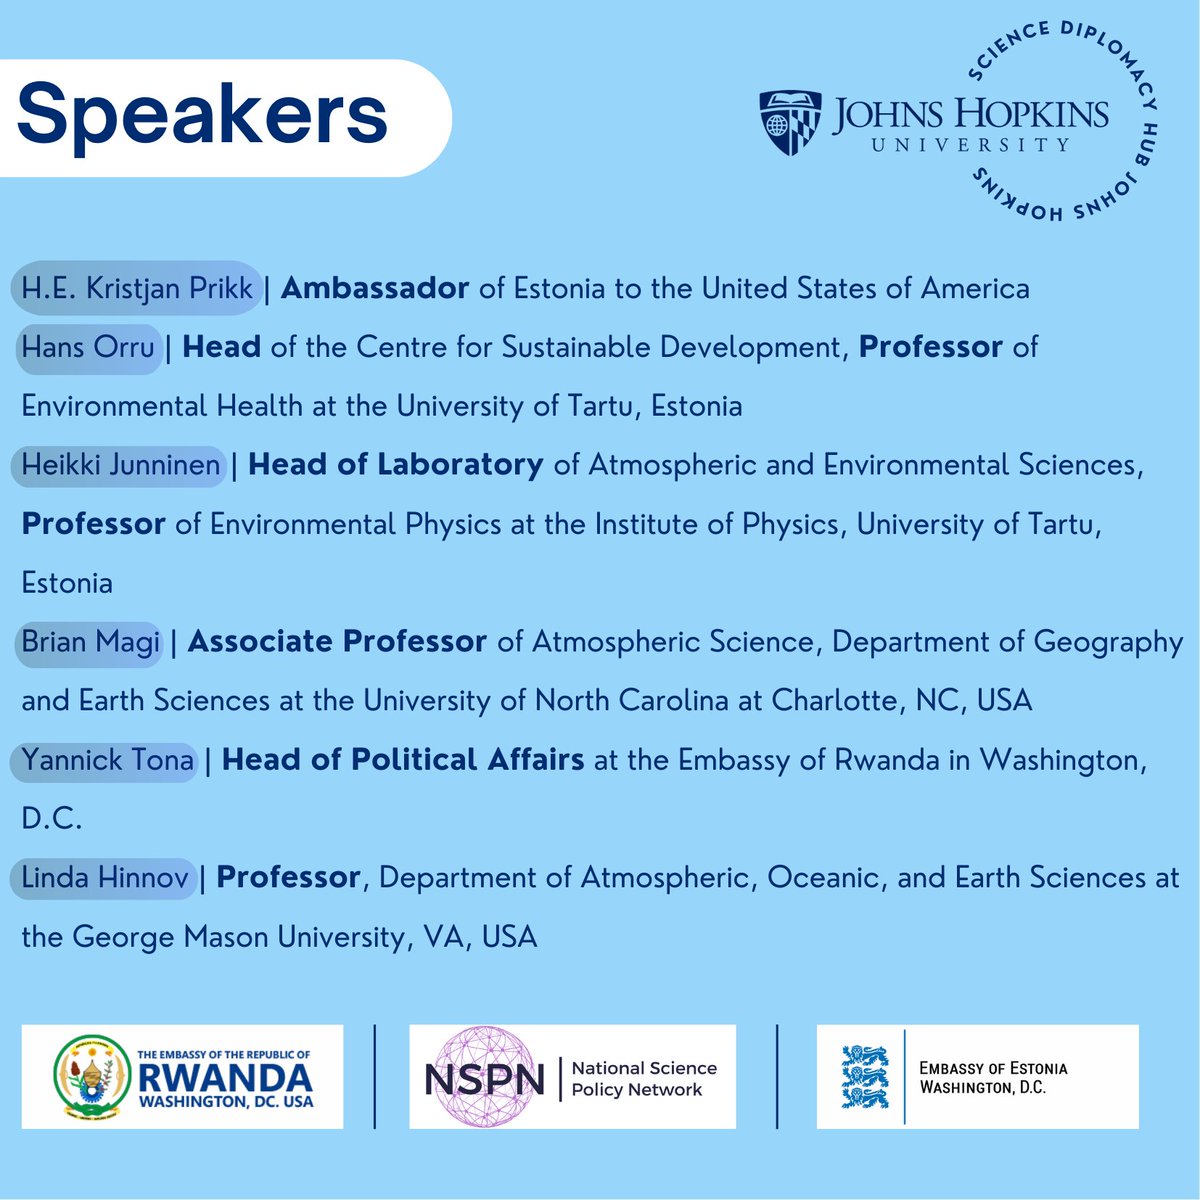 🗓️ On 5/13, join us at #HopkinsBloombergCenter for the Climate Collaboration for a Sustainable Future event organized in collaboration with @Estonia_in_US, @RwandaInUSA @SciPolNetwork. Ft @kprikk Ambassador of Estonia, @yannicktona and more. Register: bit.ly/44Ejct1